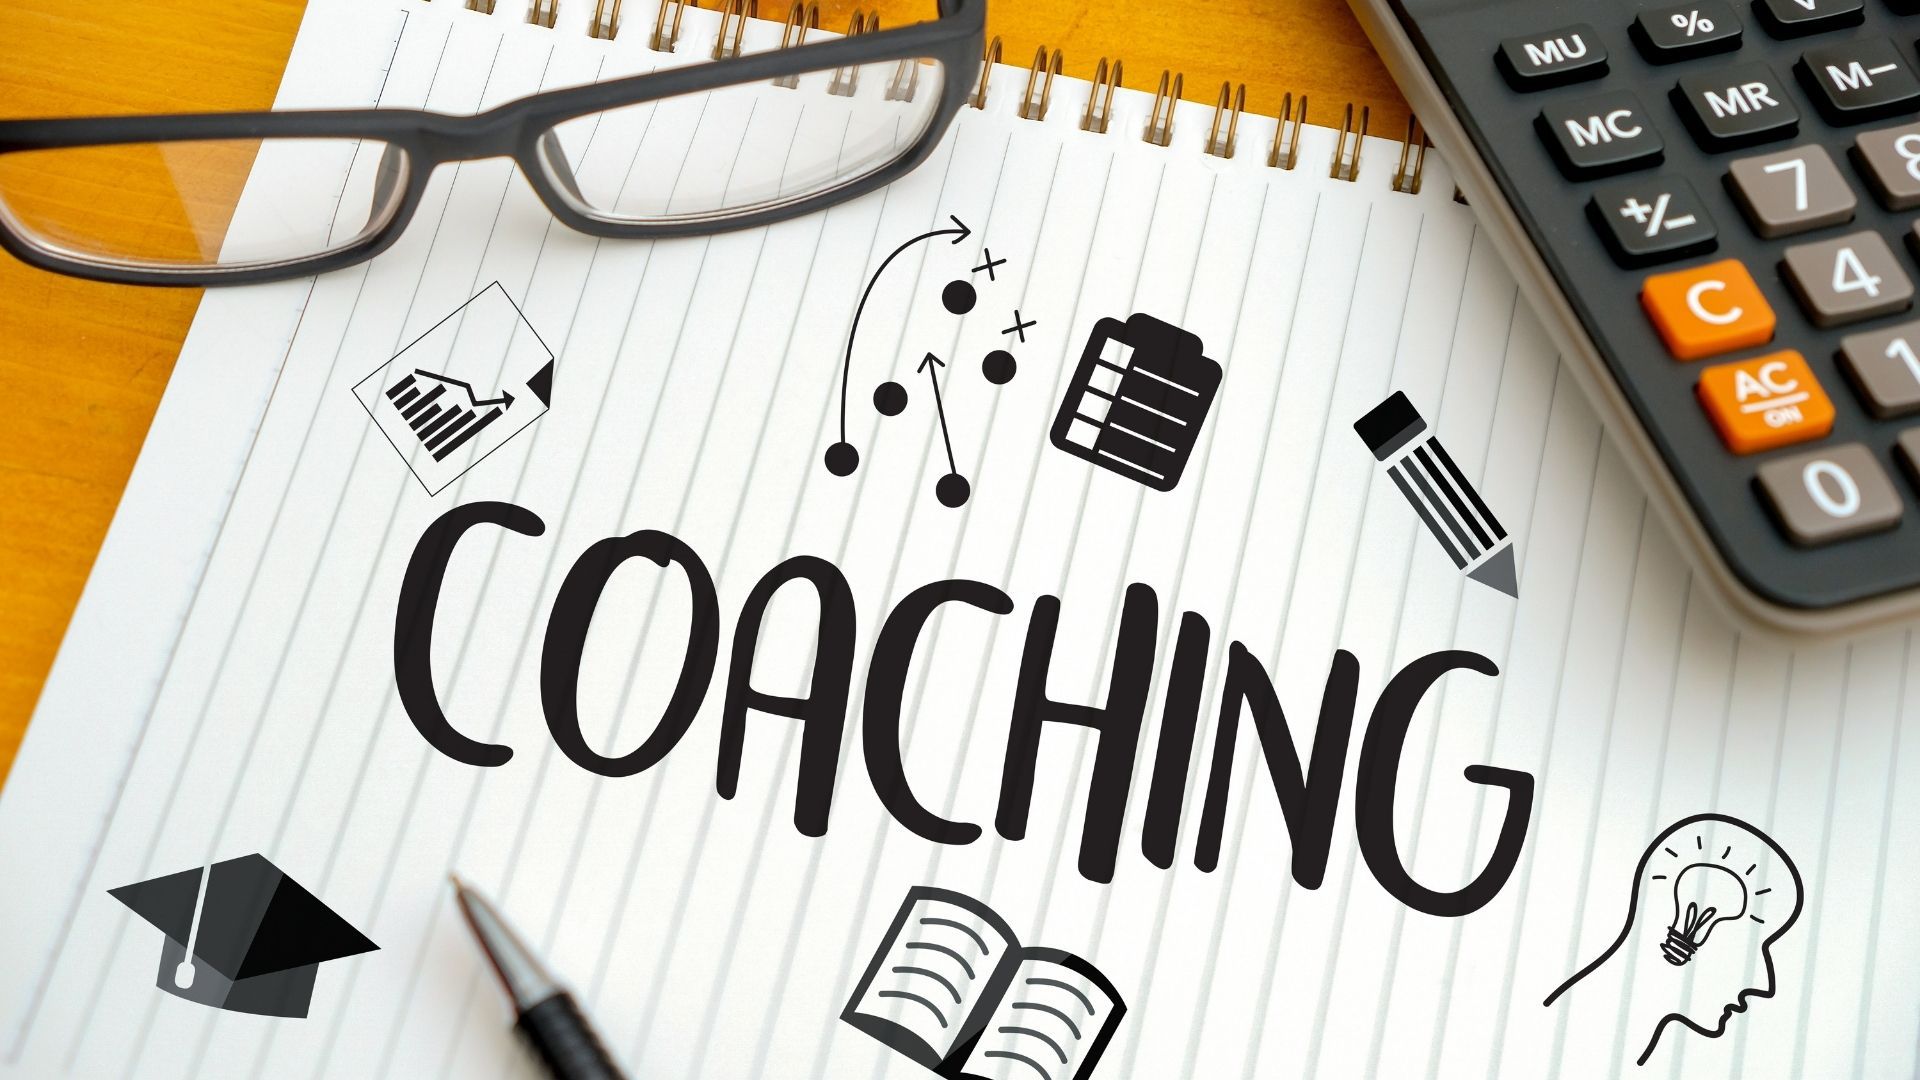 thesis about coaching